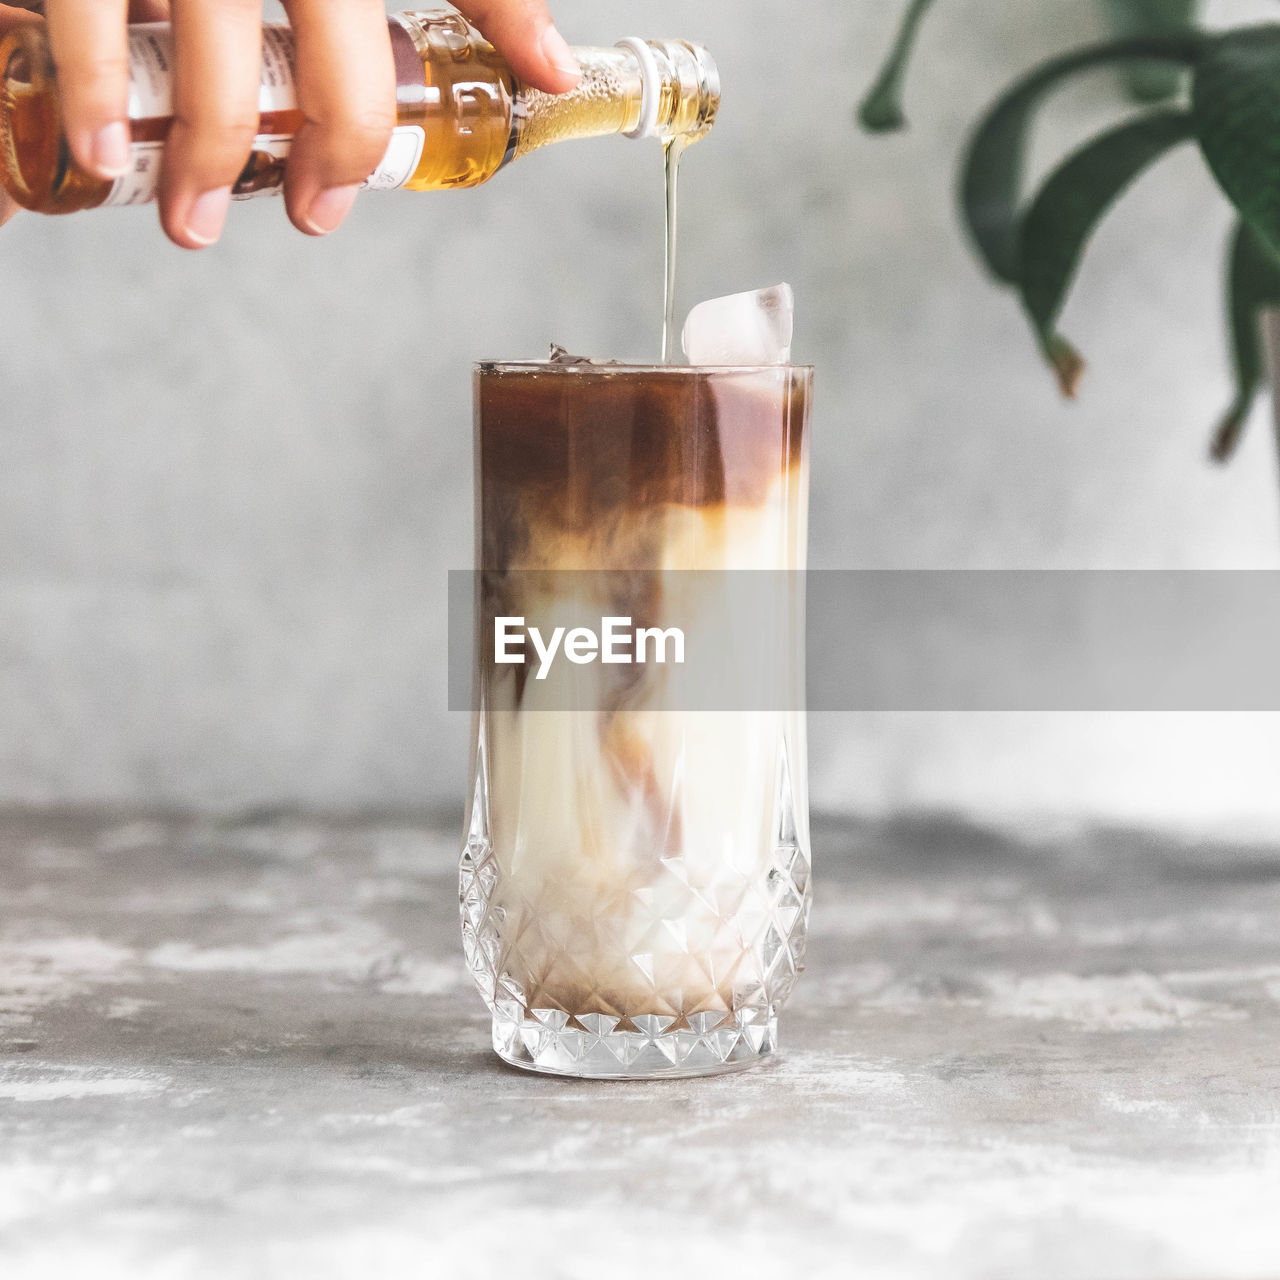 Midsection of person pouring syrup into coffee in glass